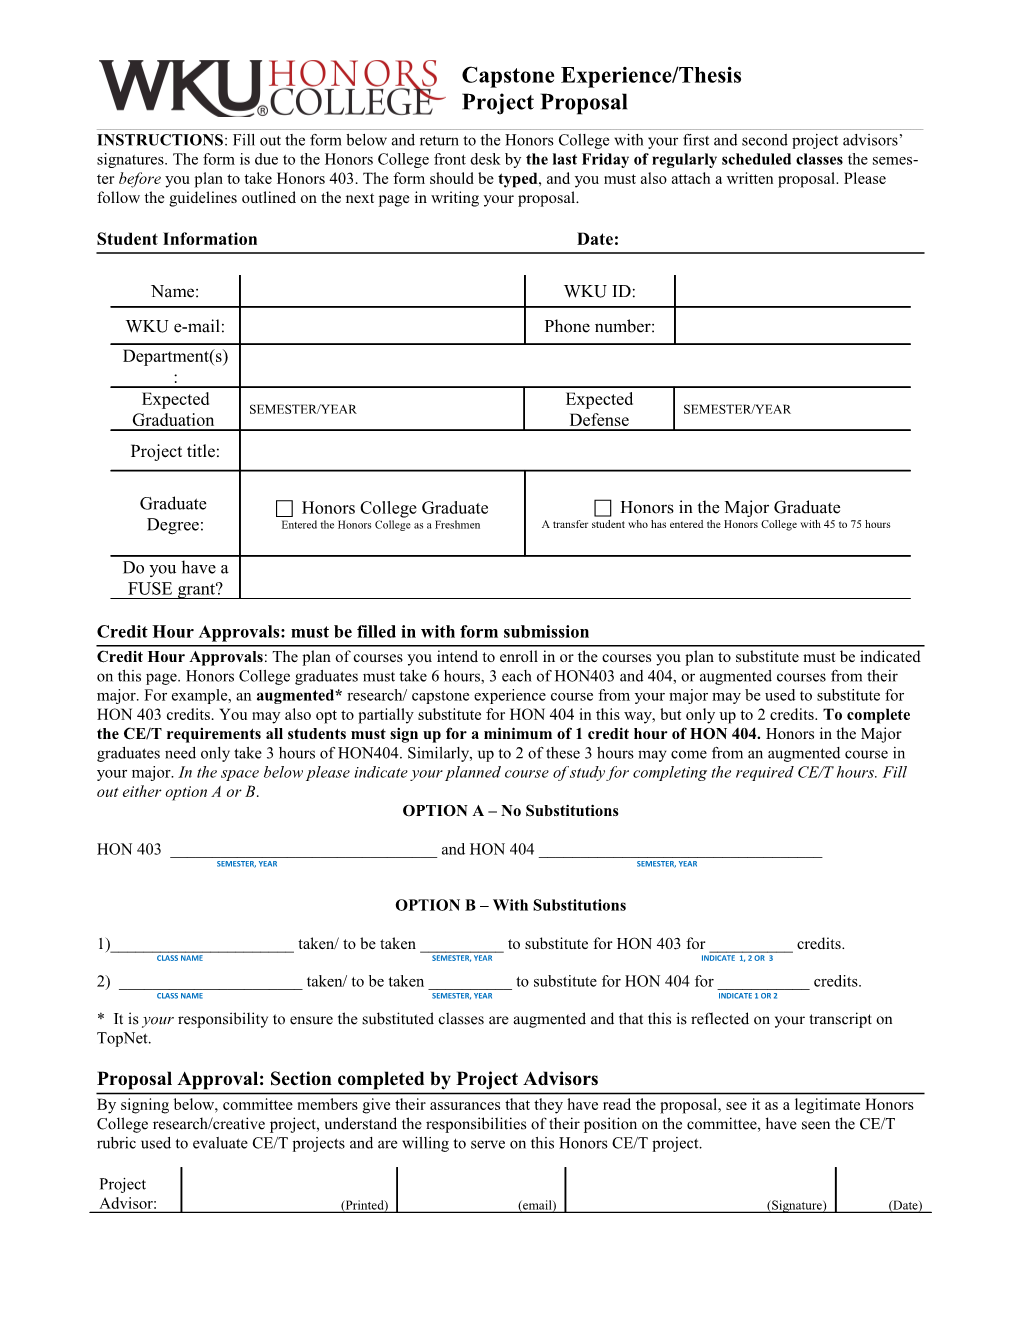 Credit Hour Approvals: Must Be Filled in with Form Submission